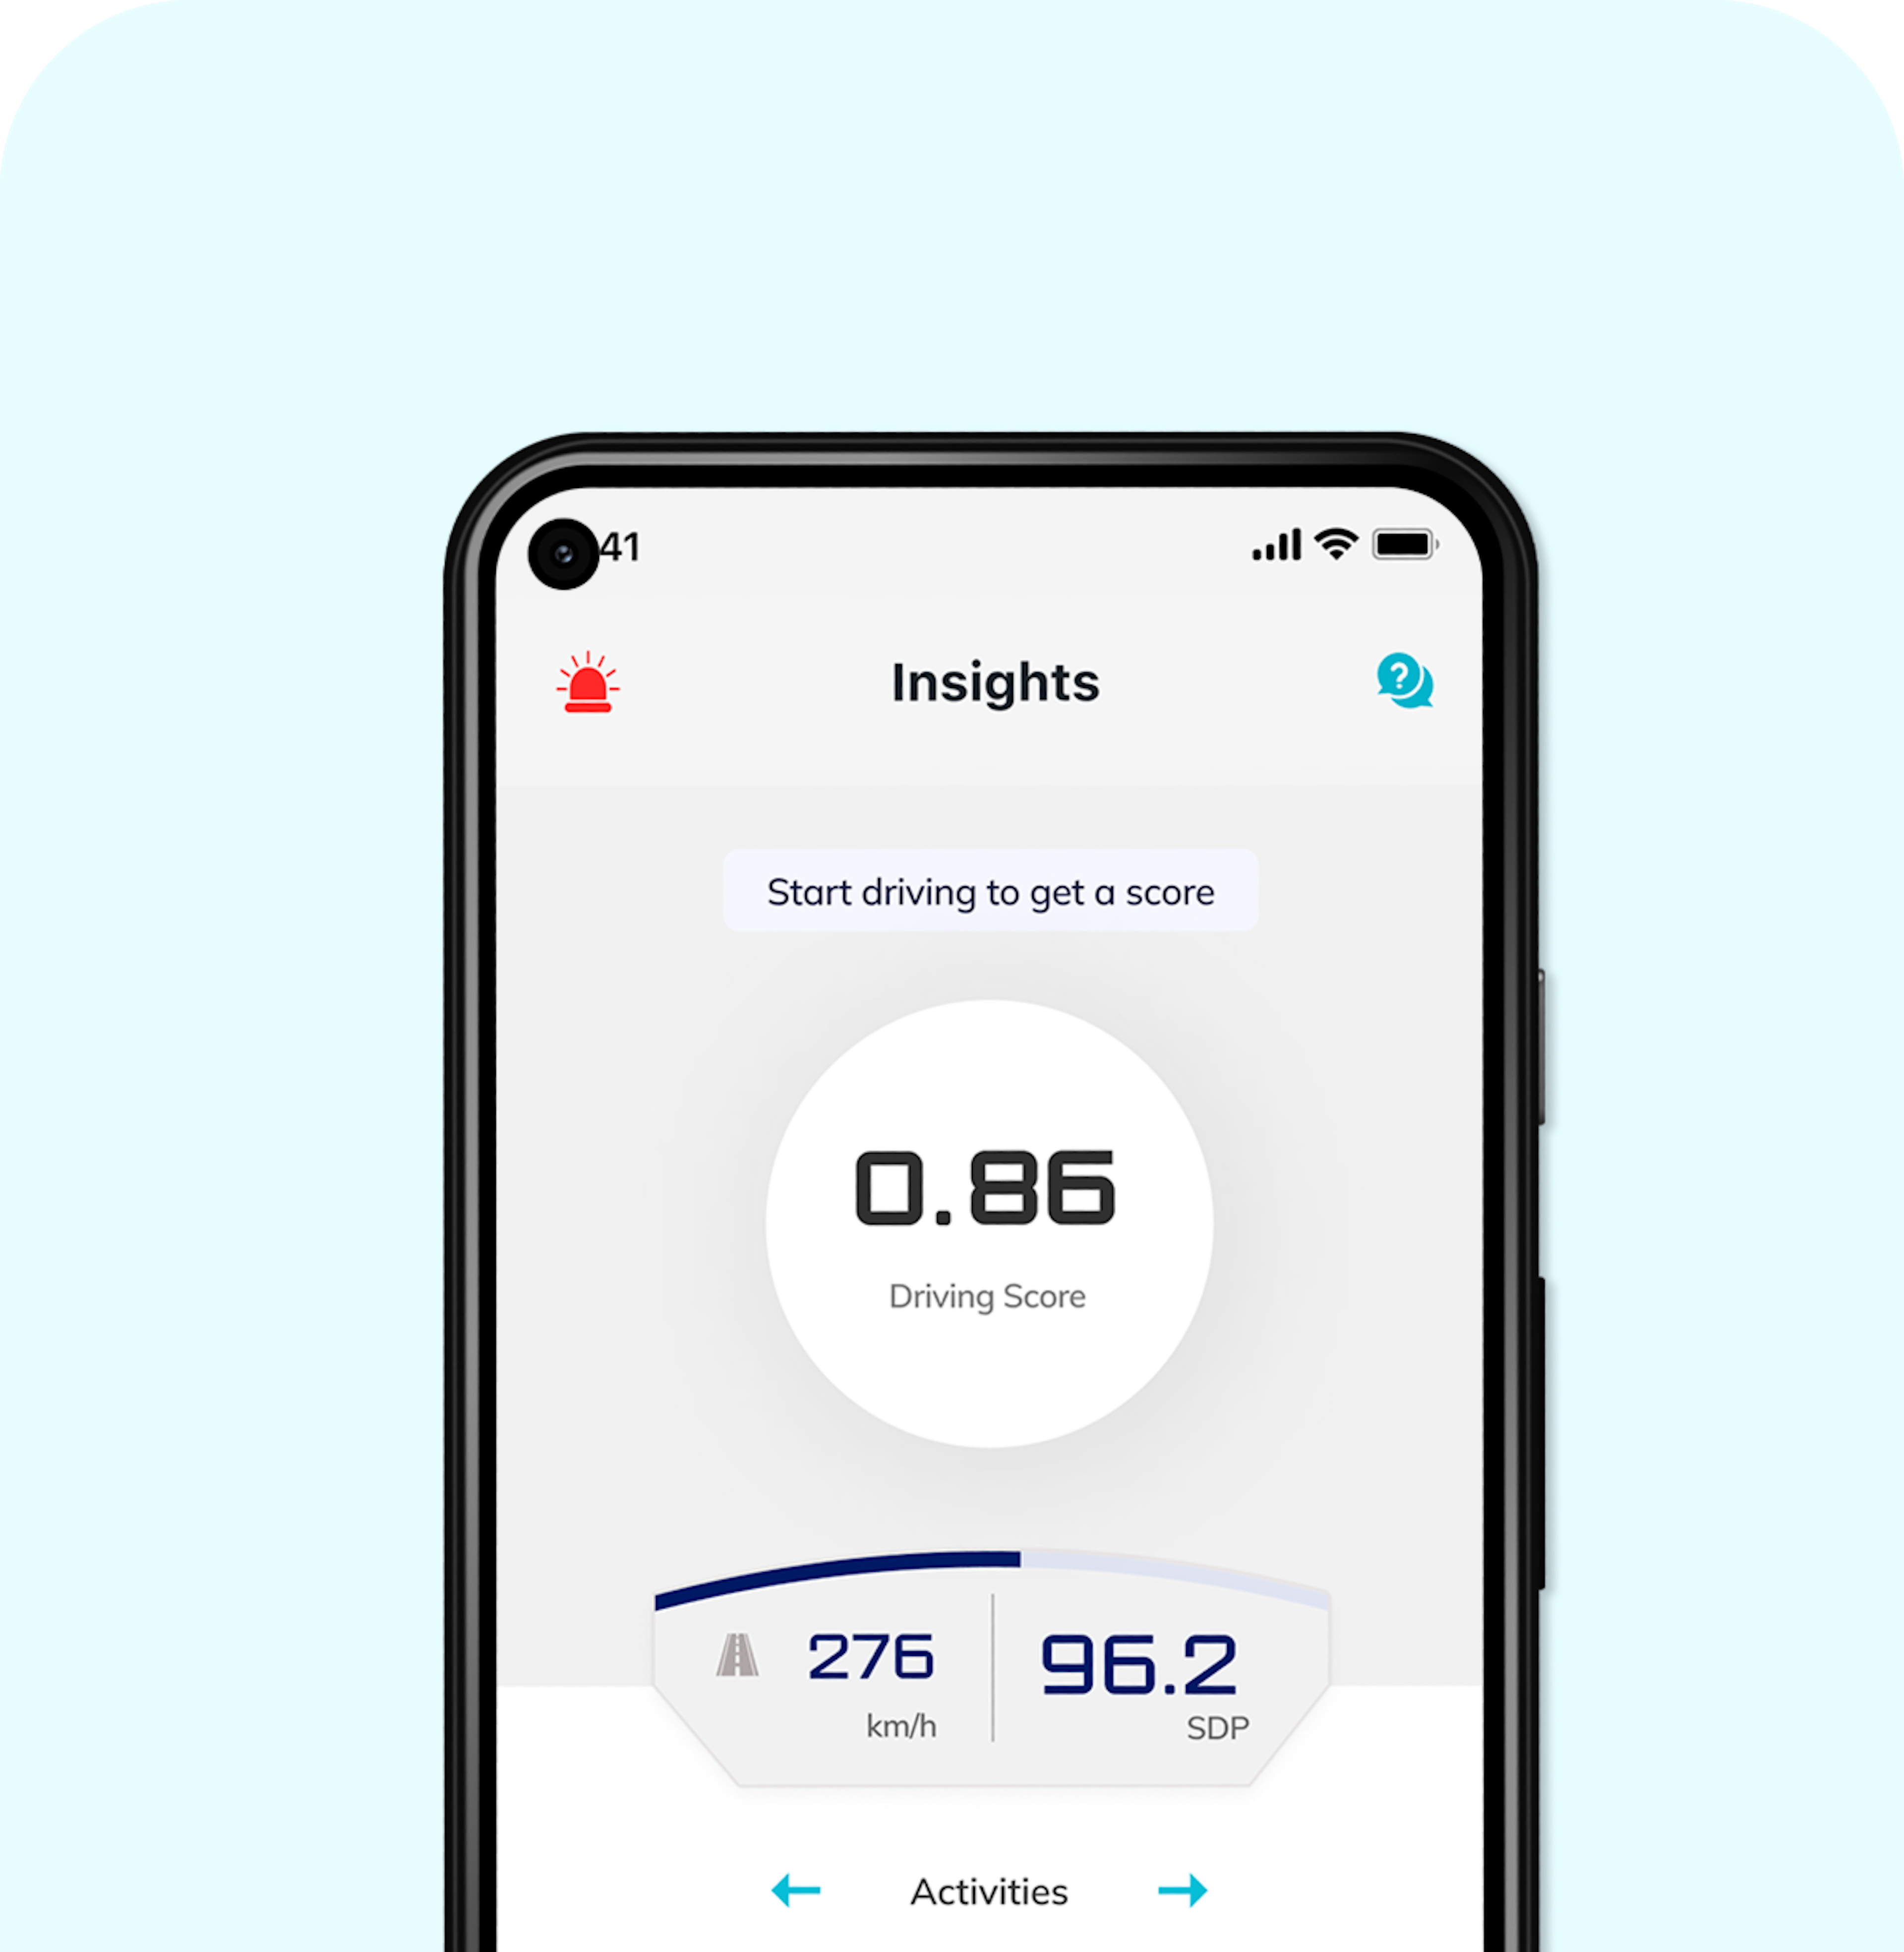 ETAP's driving insights enable you to understand and improve your driving habits, track your progress over time with easy-to-understand charts and graphs, and earn rewards through the new Takaful car insurance